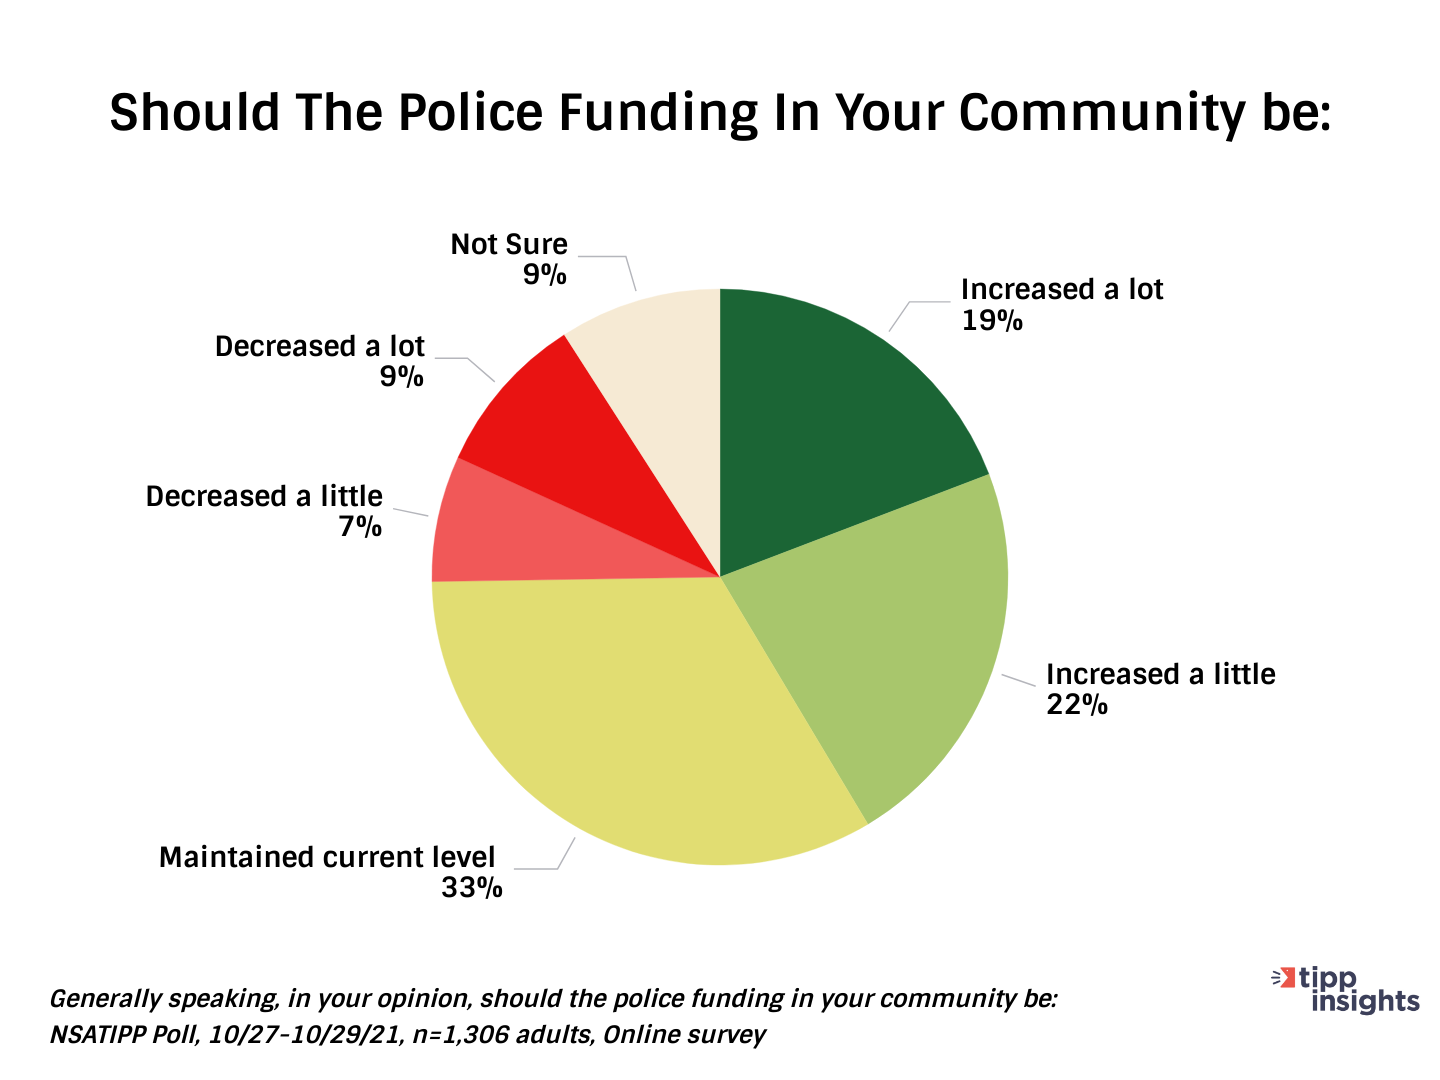 NSA/TIPP Poll Results: Should American communities Increase or decrease police funding